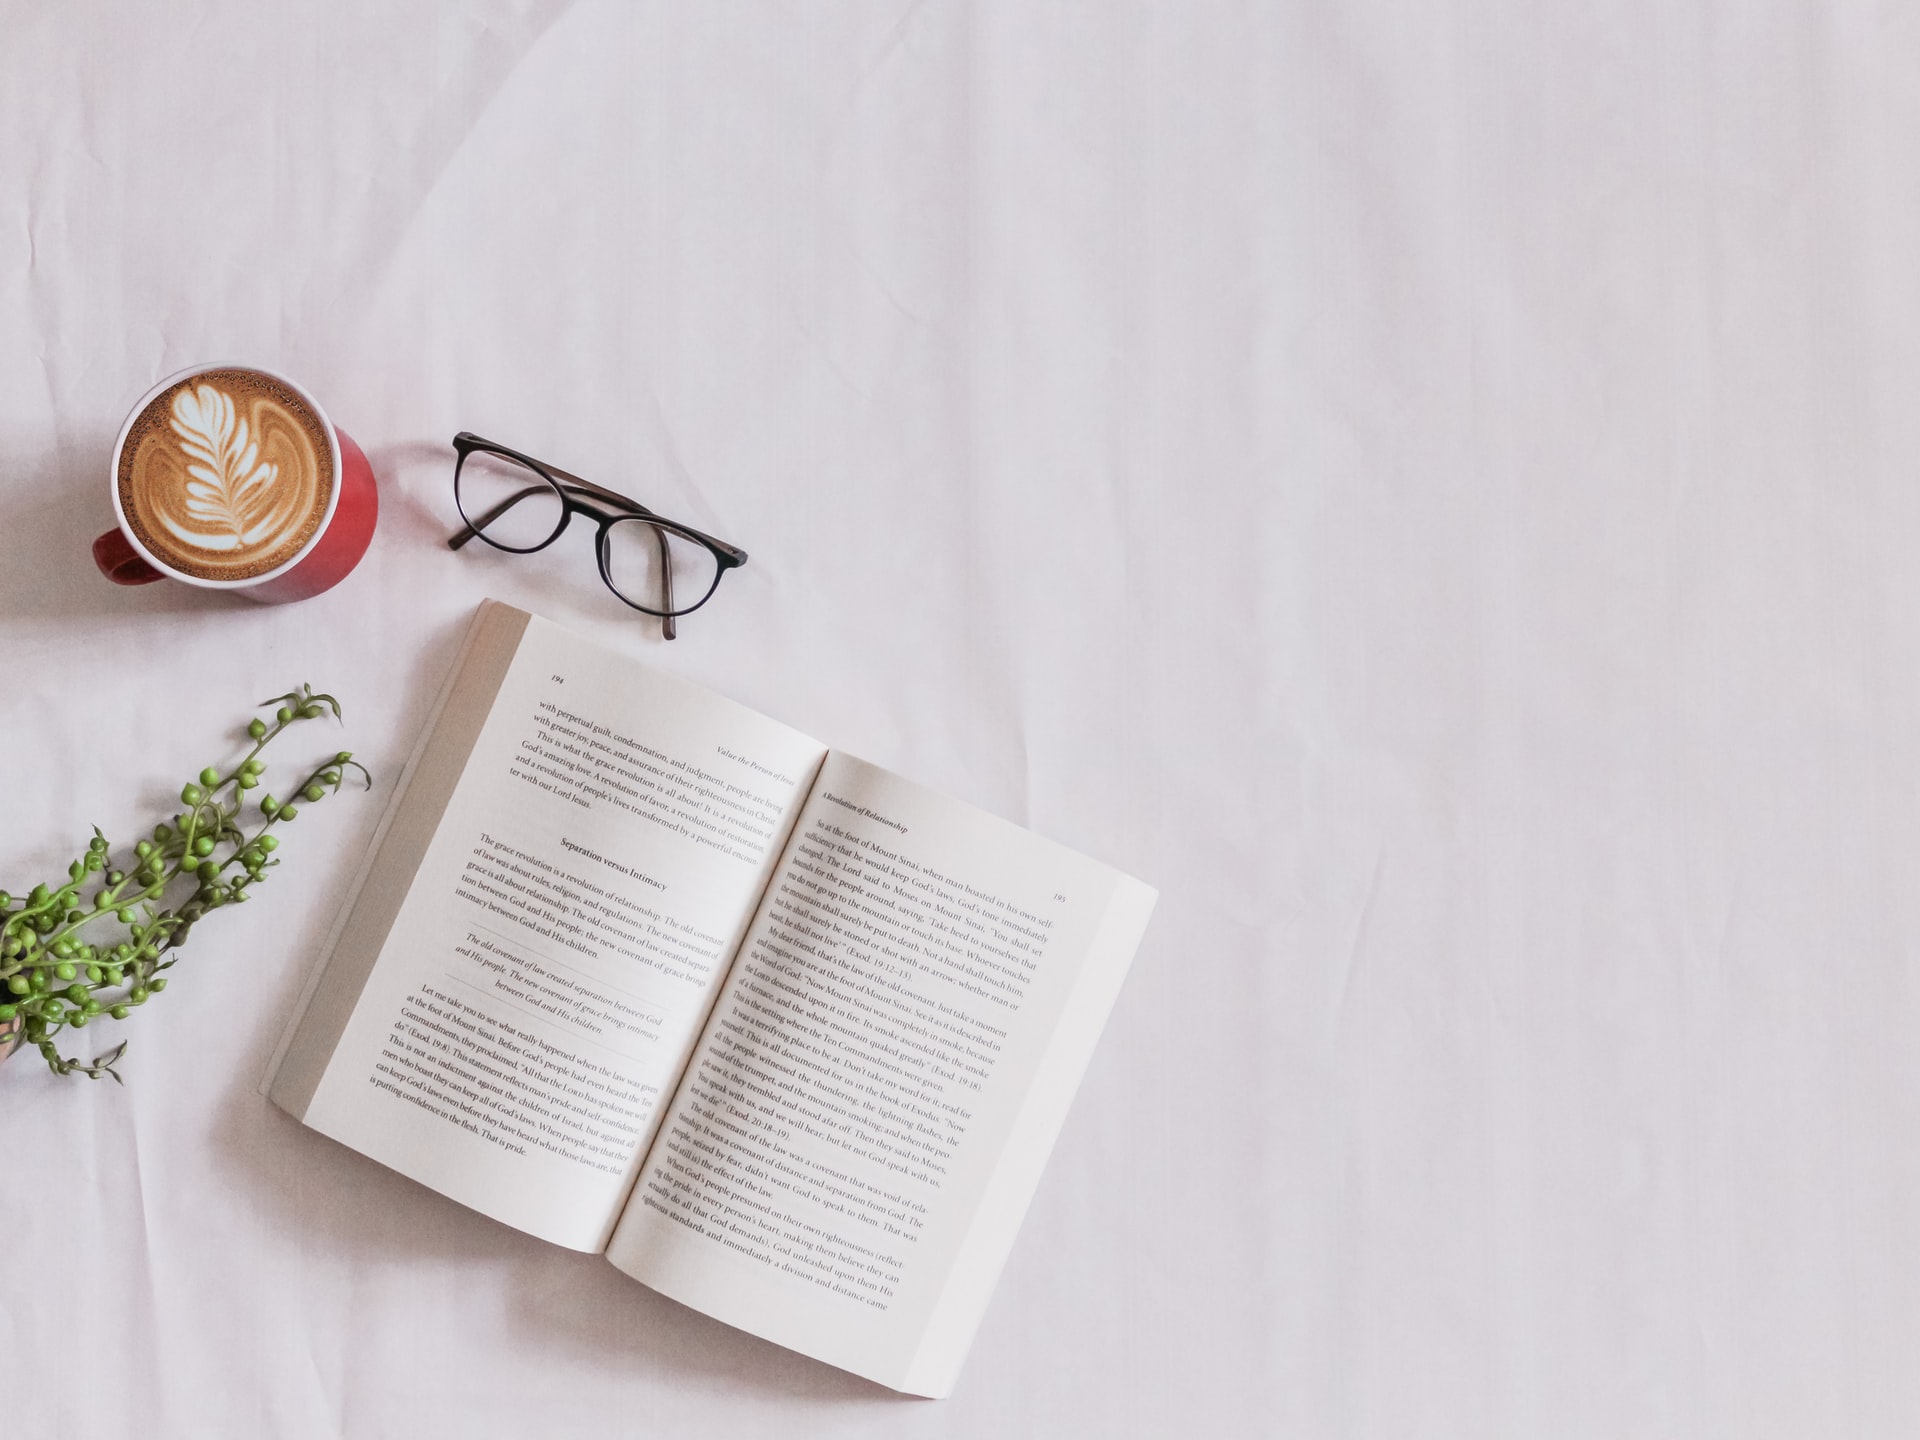 open book placed next to eye glasses and a mug of coffee and trailing plant vines against a white background